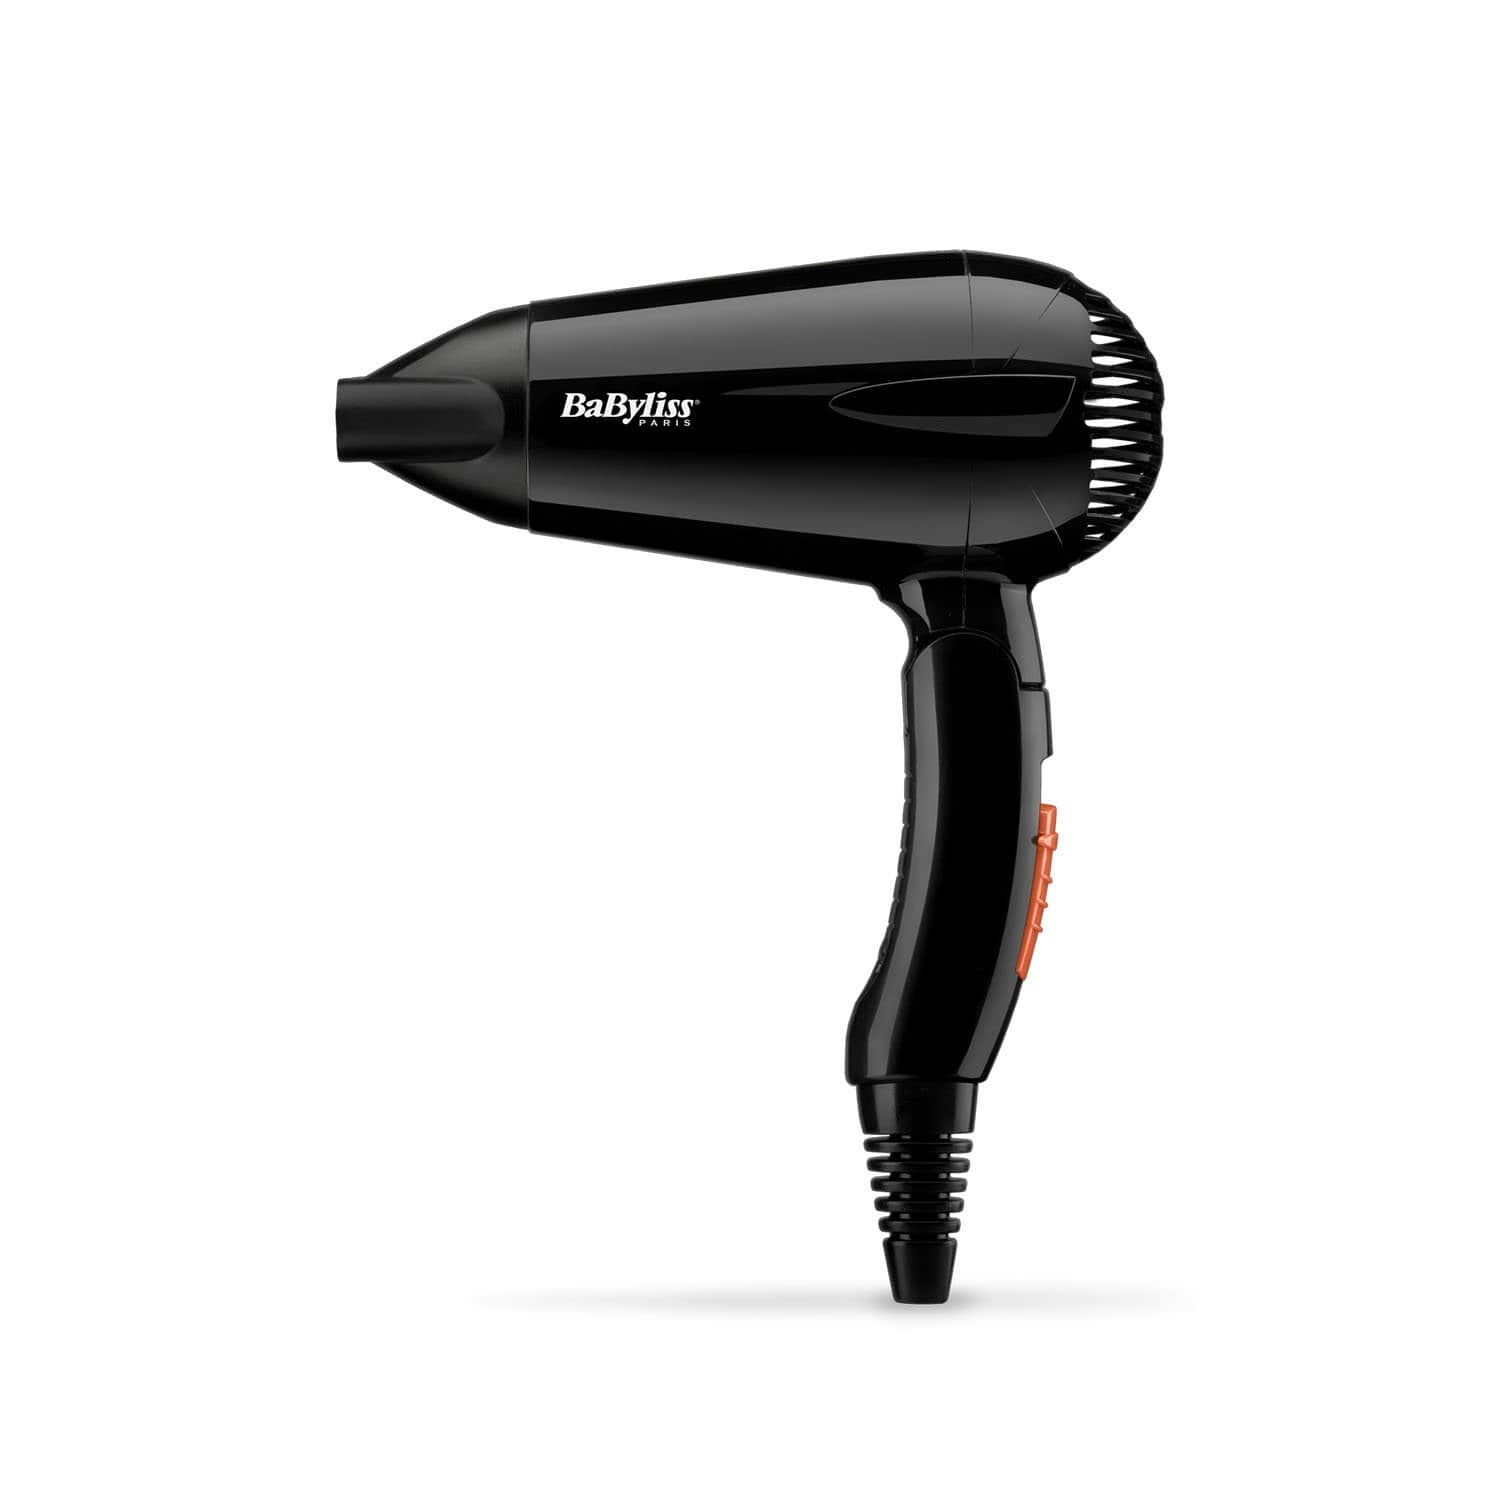 BABYLISS DC DRYER 2000W BLACK TRAVEL  DUAL VOLTAGE  FAST DRYING 2 HEAT/ SPEED SETTINGS  NOZZLE  FOLDING HANDLE  LIGHT - 5344SDE